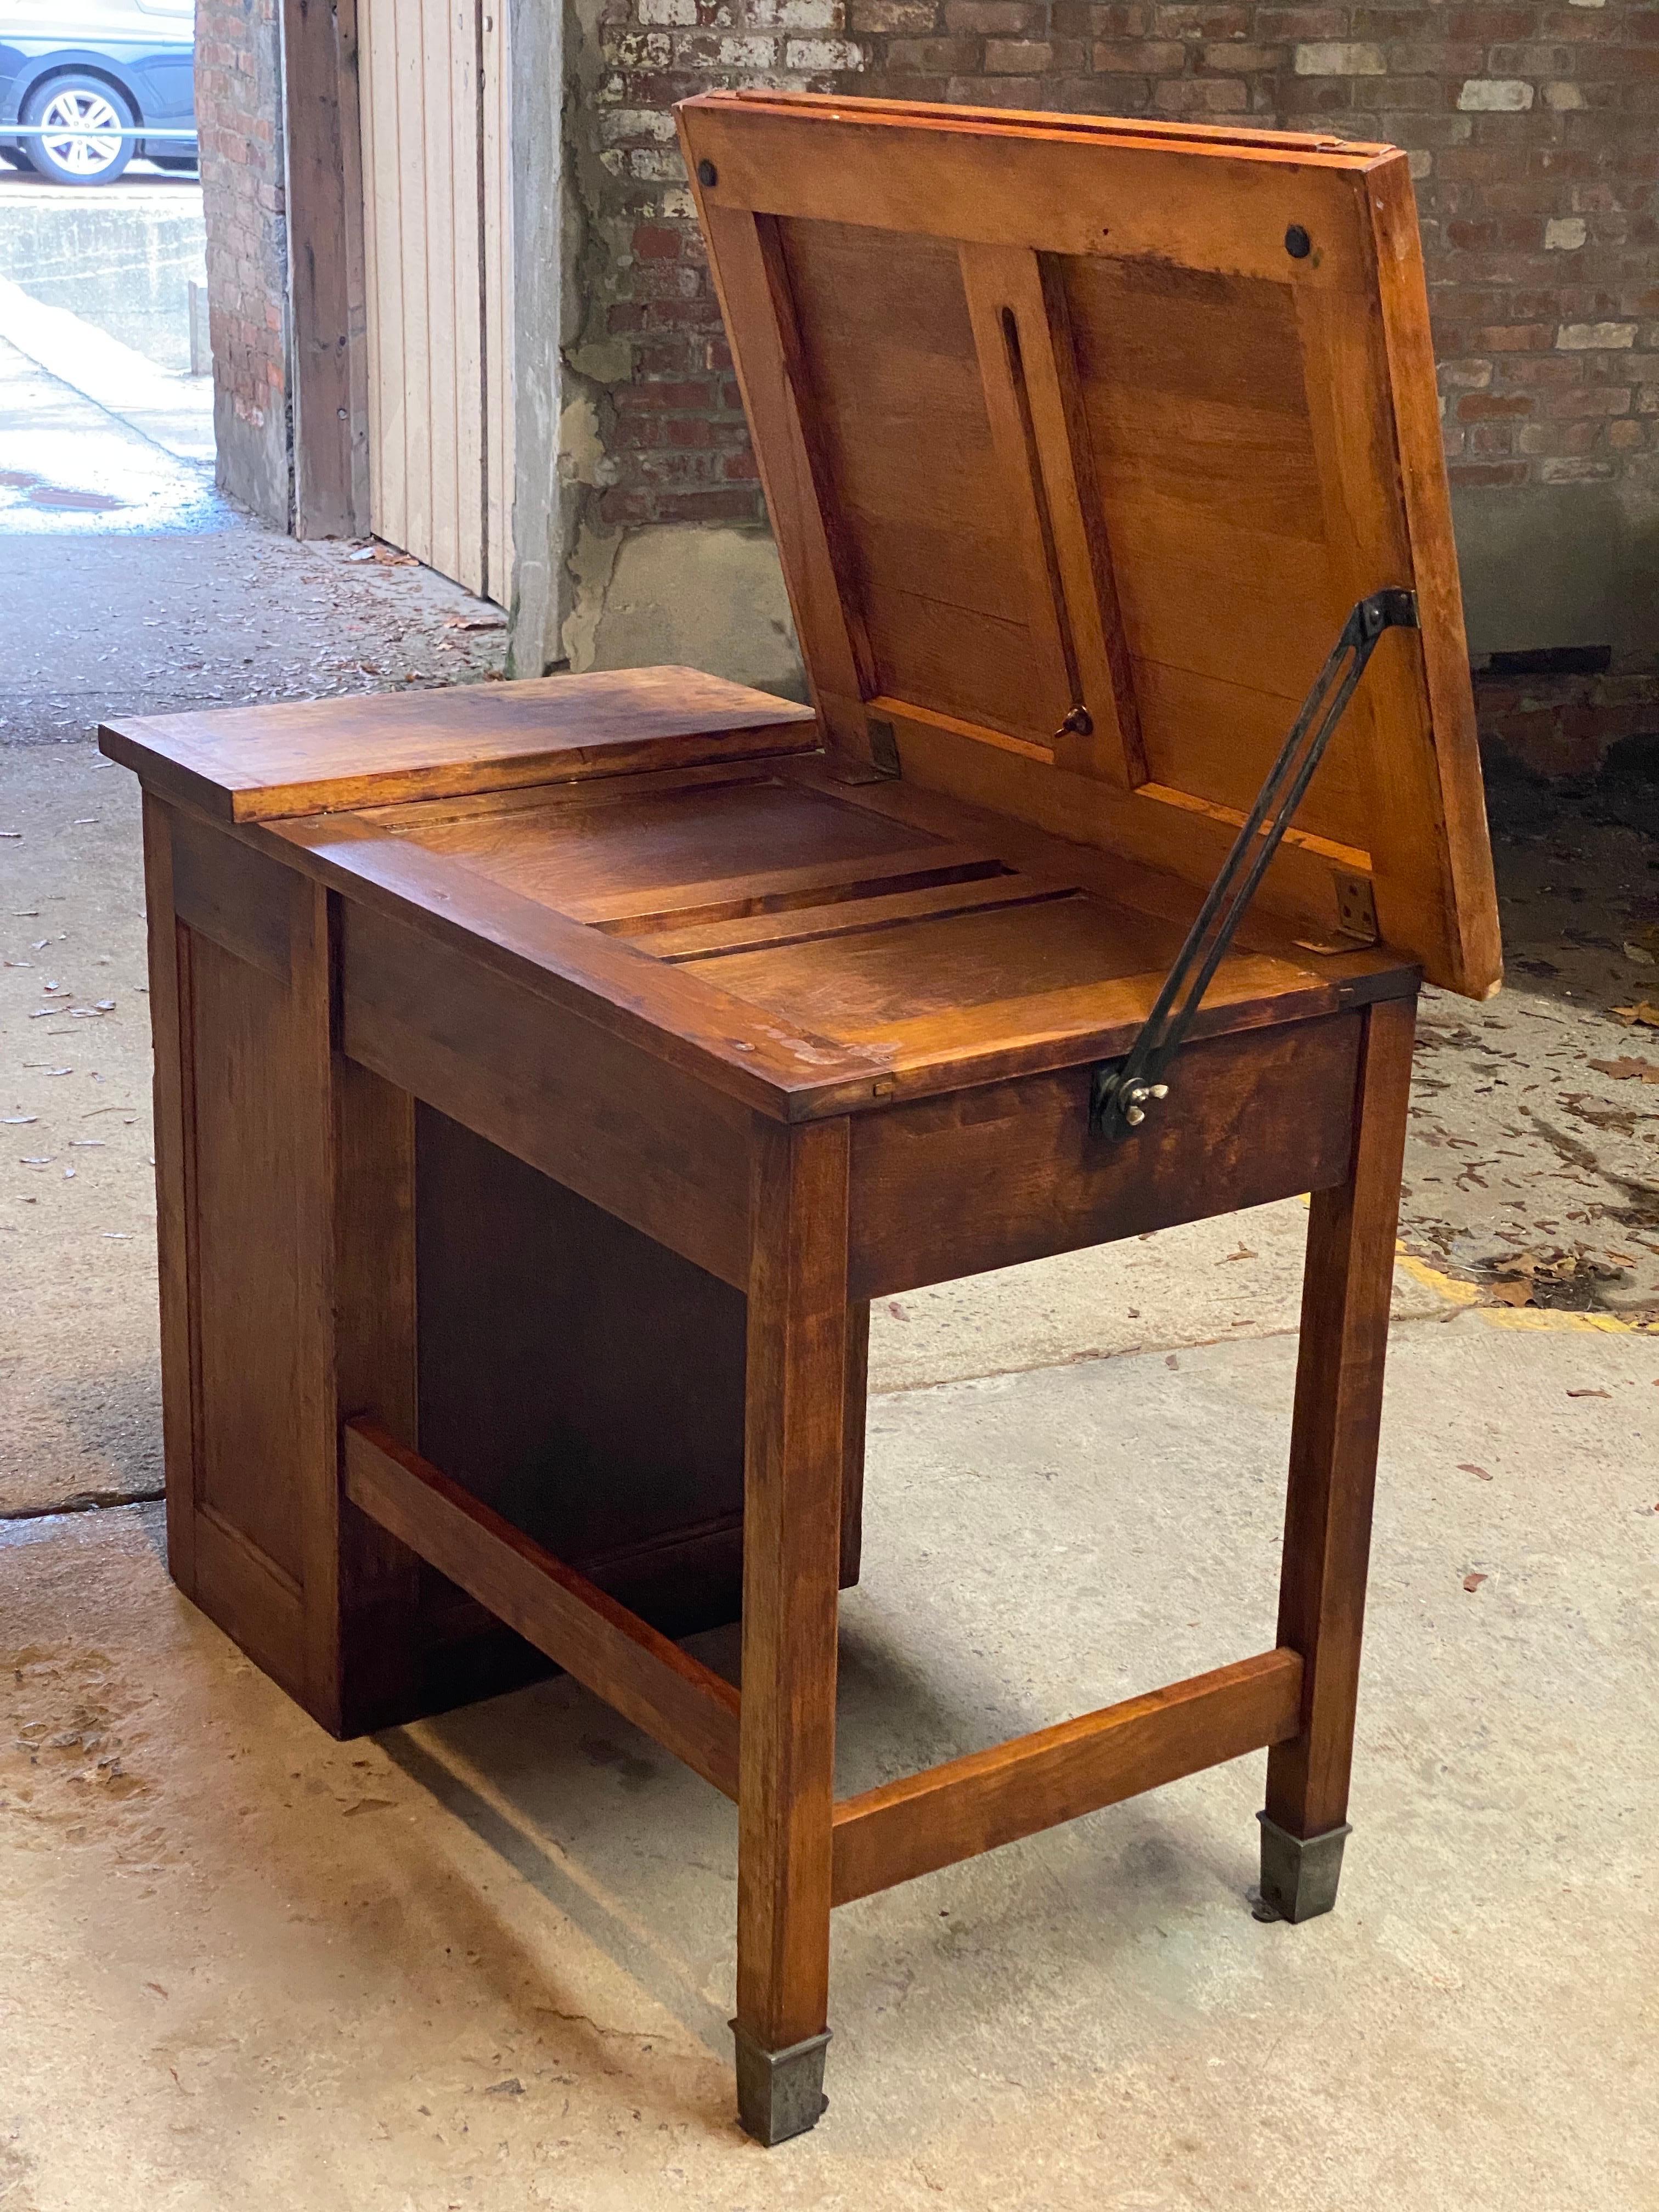 1930s Small Scale Industrial Drafting Table In Good Condition For Sale In Garnerville, NY